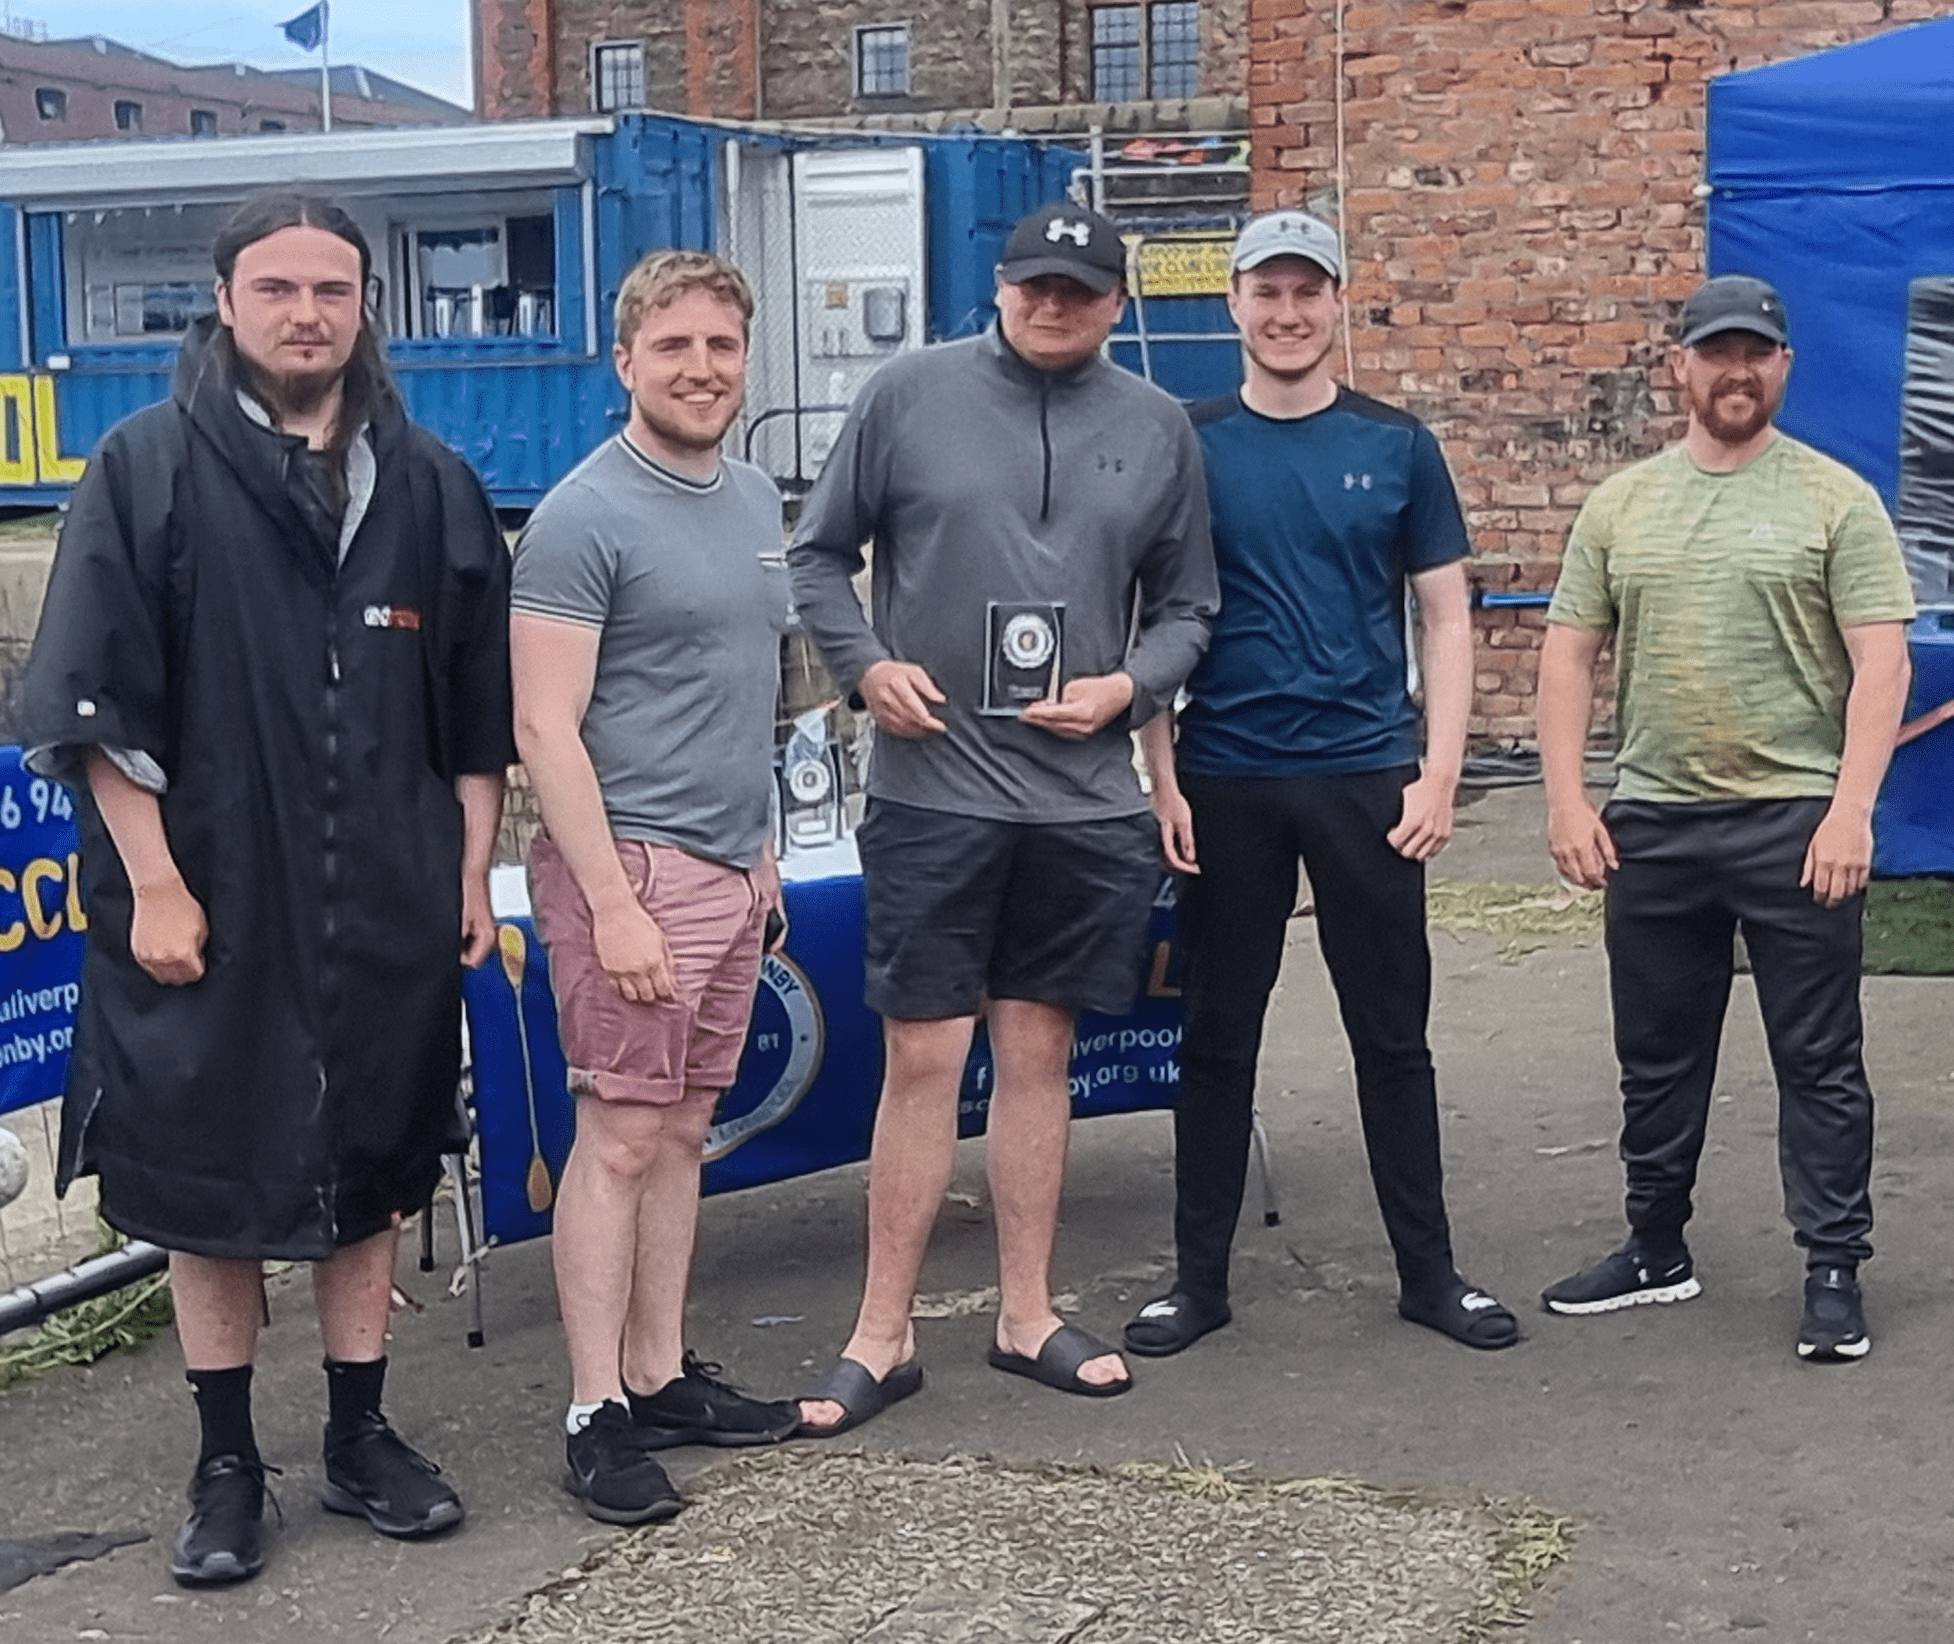 A group of men standing outside

Description automatically generated with low confidence